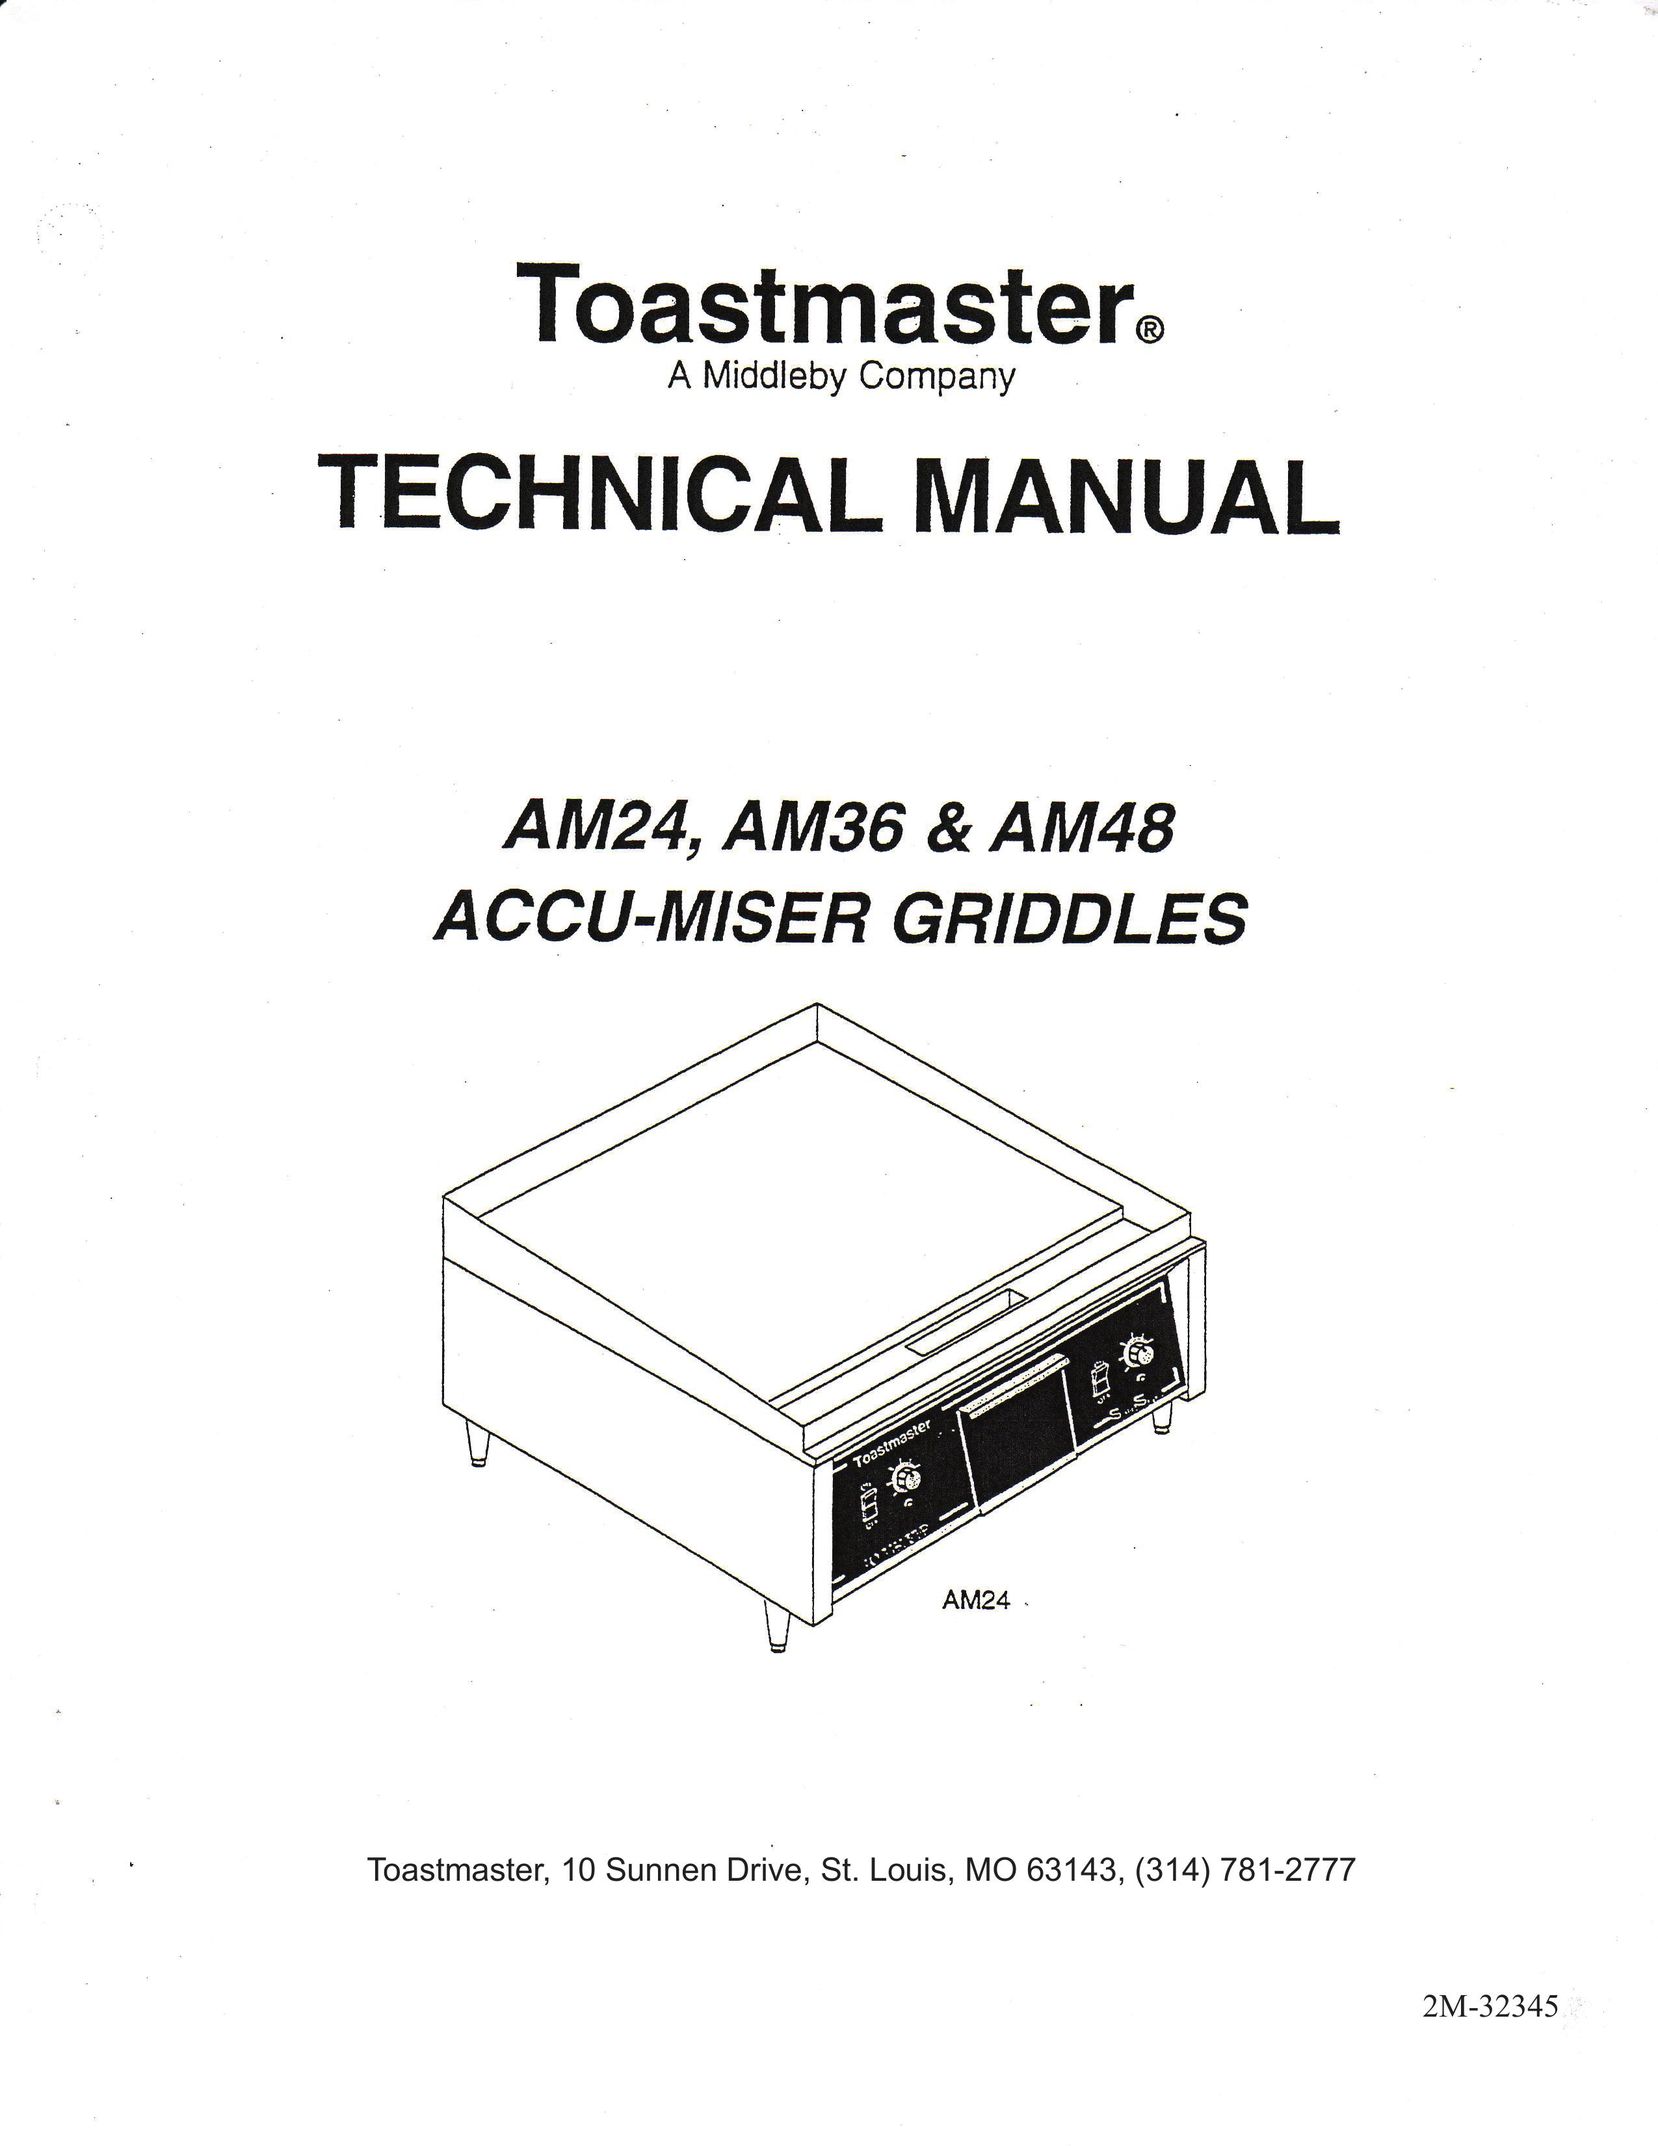 Toastmaster AM48 Cooktop User Manual